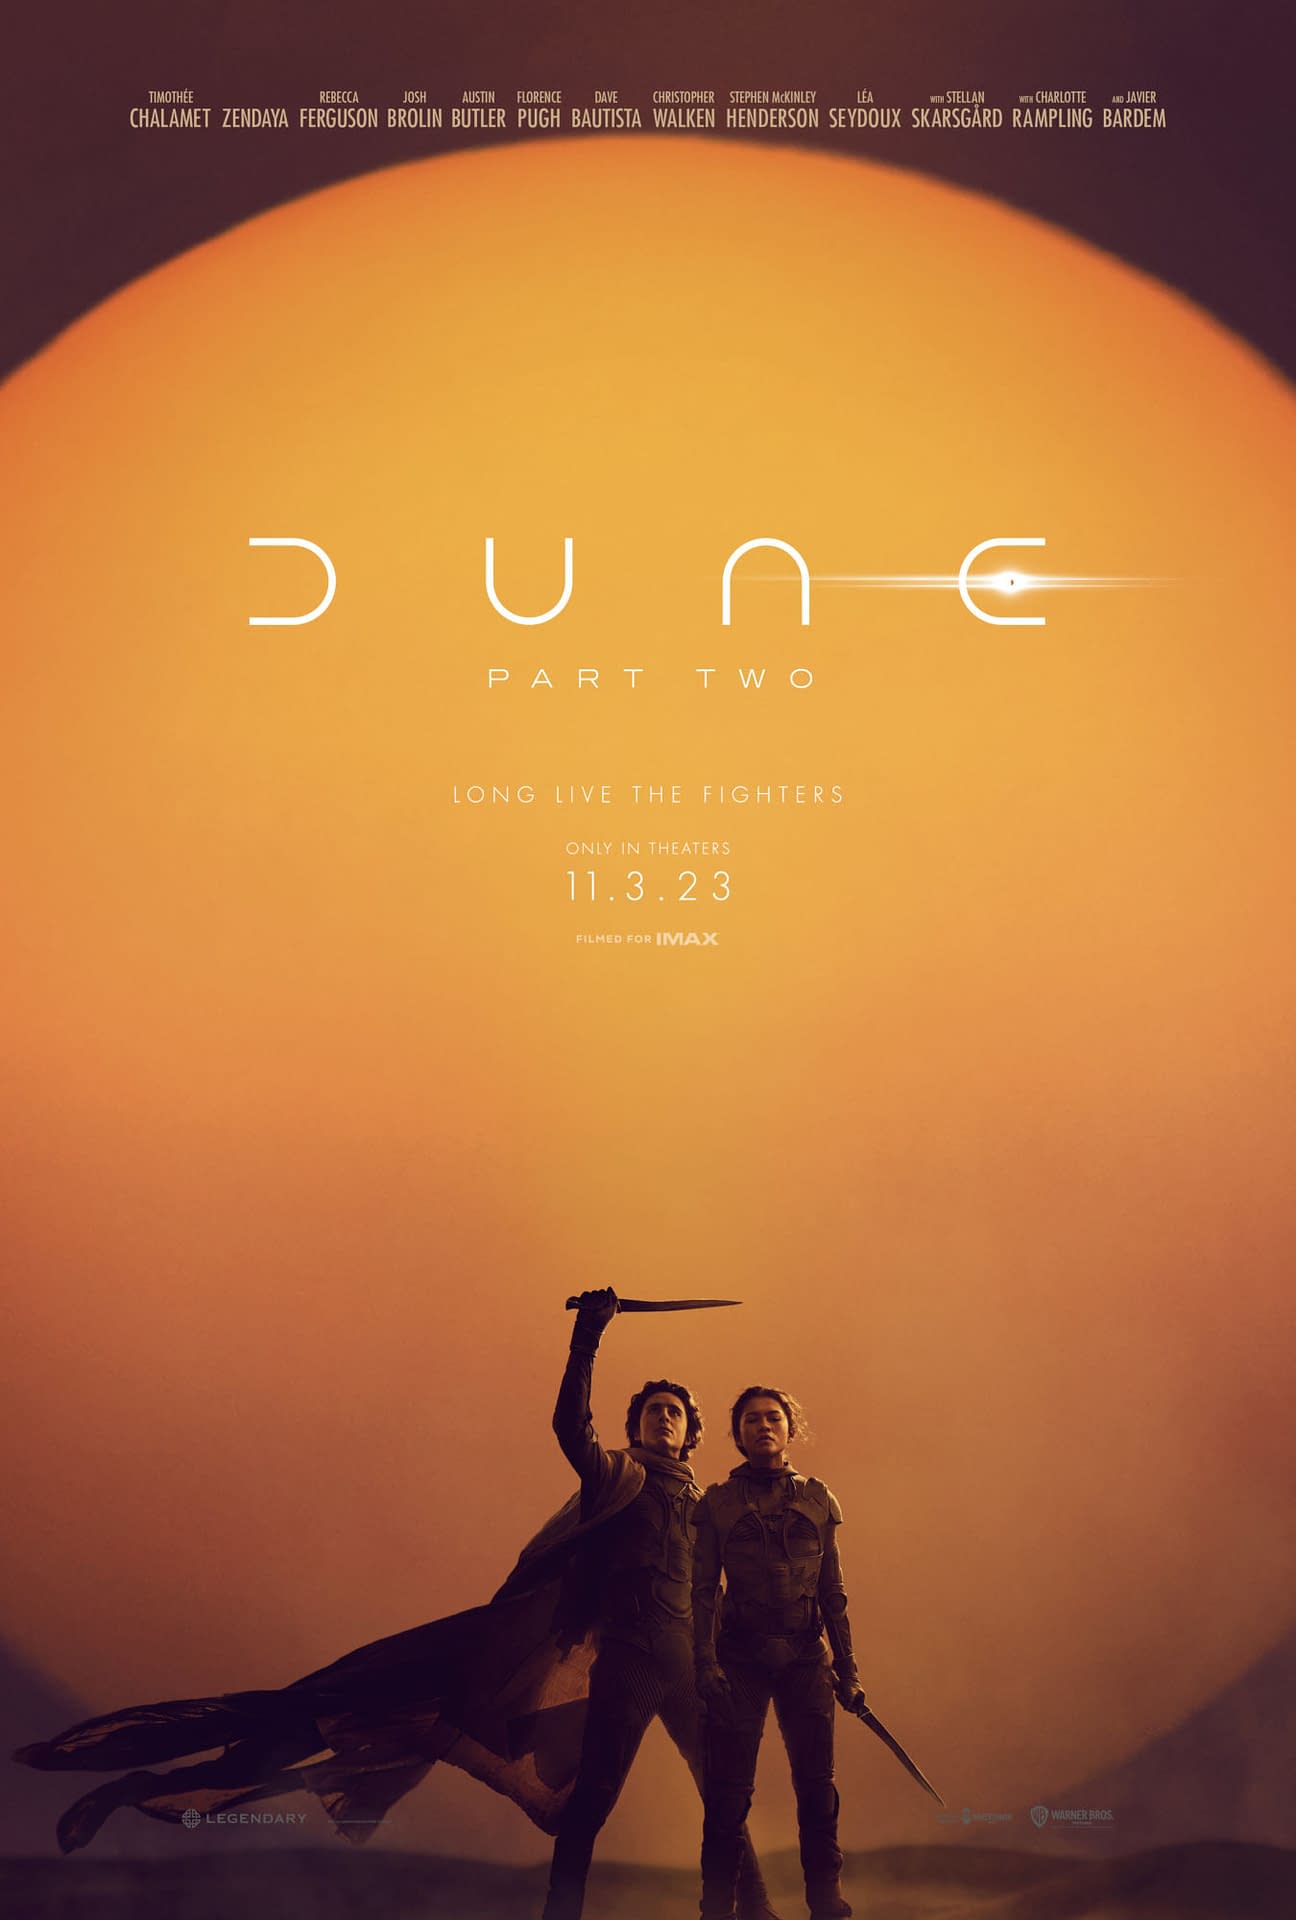 Dune Part Two First Poster Is Released, Trailer Drops Tomorrow